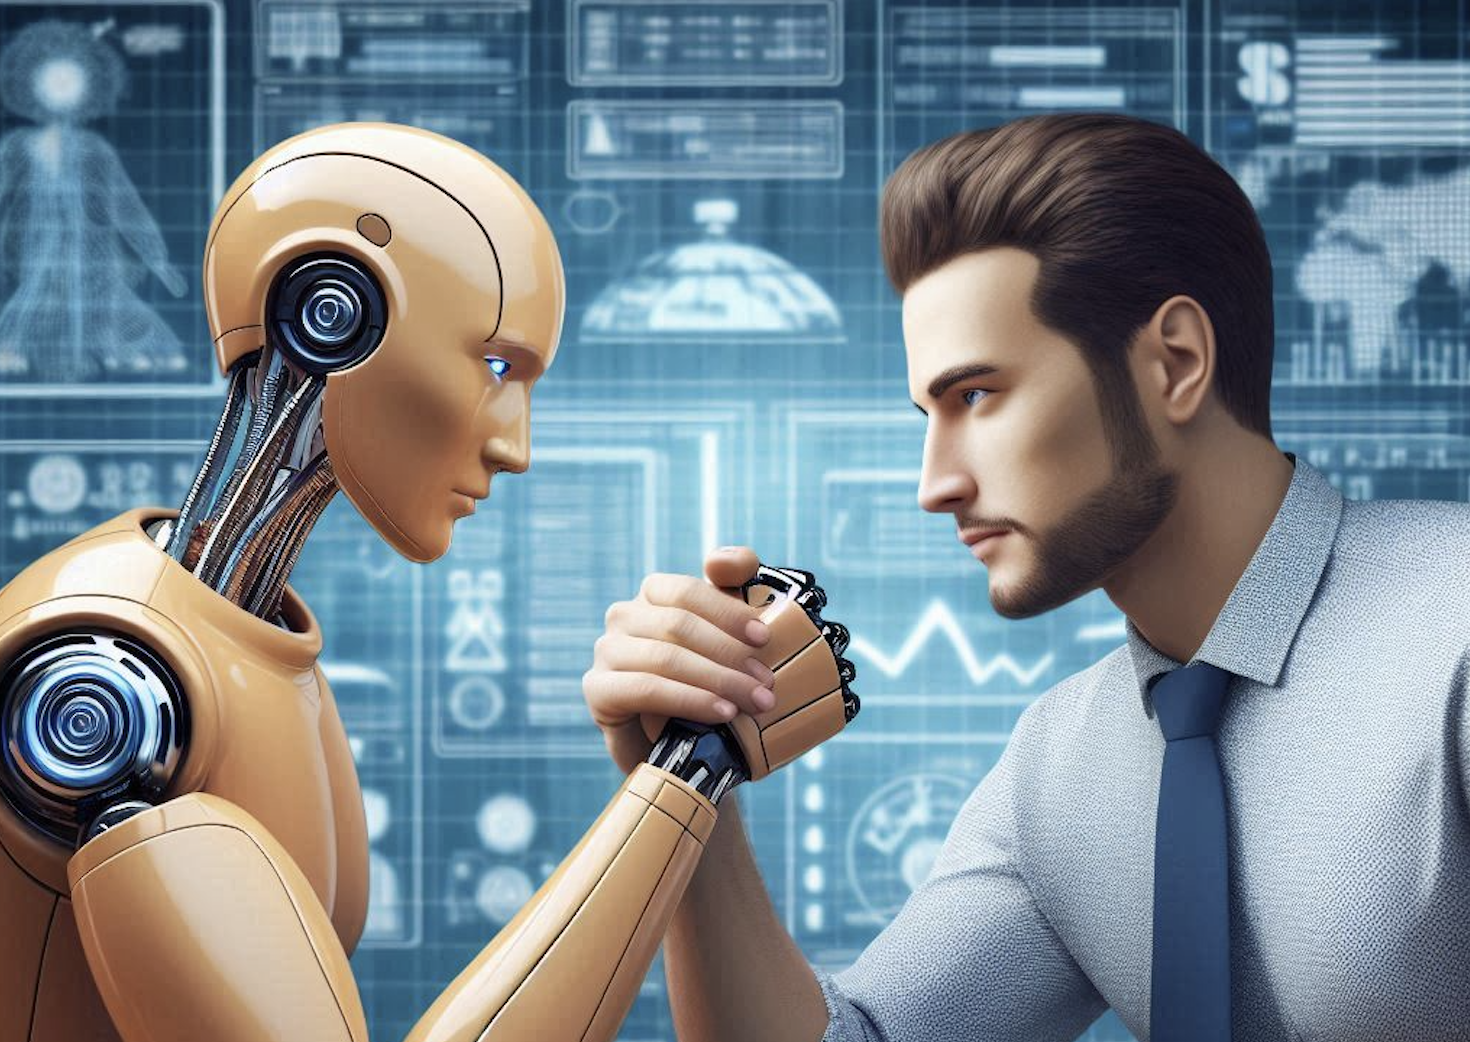 An image of a bearded white male office worker with his shirtsleeve rolled up arm-wrestling an AI android in an office.